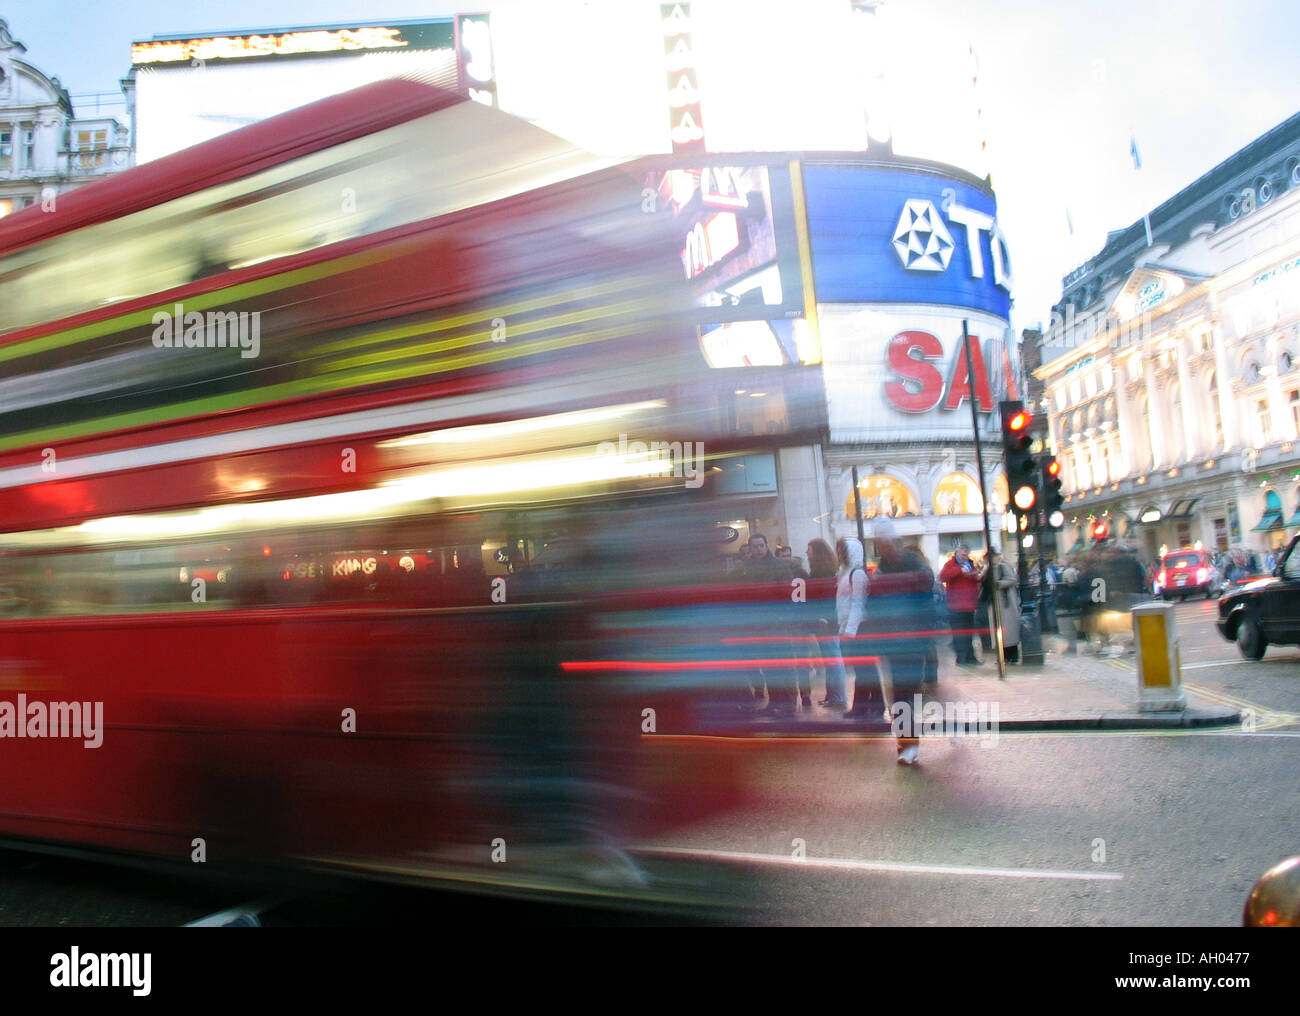 Piccadilly Circus London England Britain UK Stock Photo